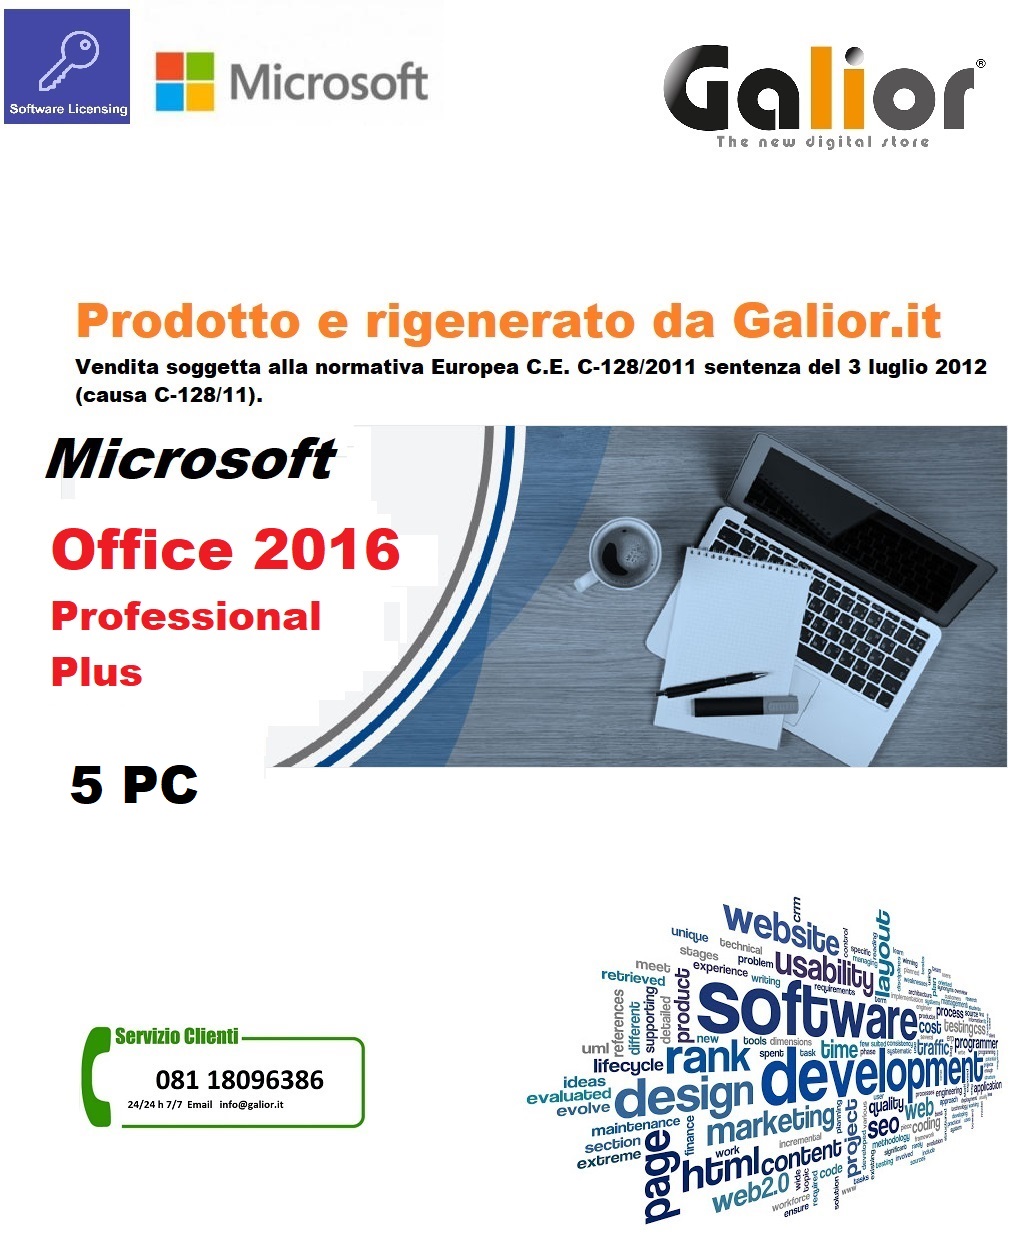 MICROSOFT OFFICE 2016 PROFESSIONAL PLUS LICENSE UNMADE AND REGENERATED AS  PER EU REGULATION n. 2009/24/EC and sentence C-128/11